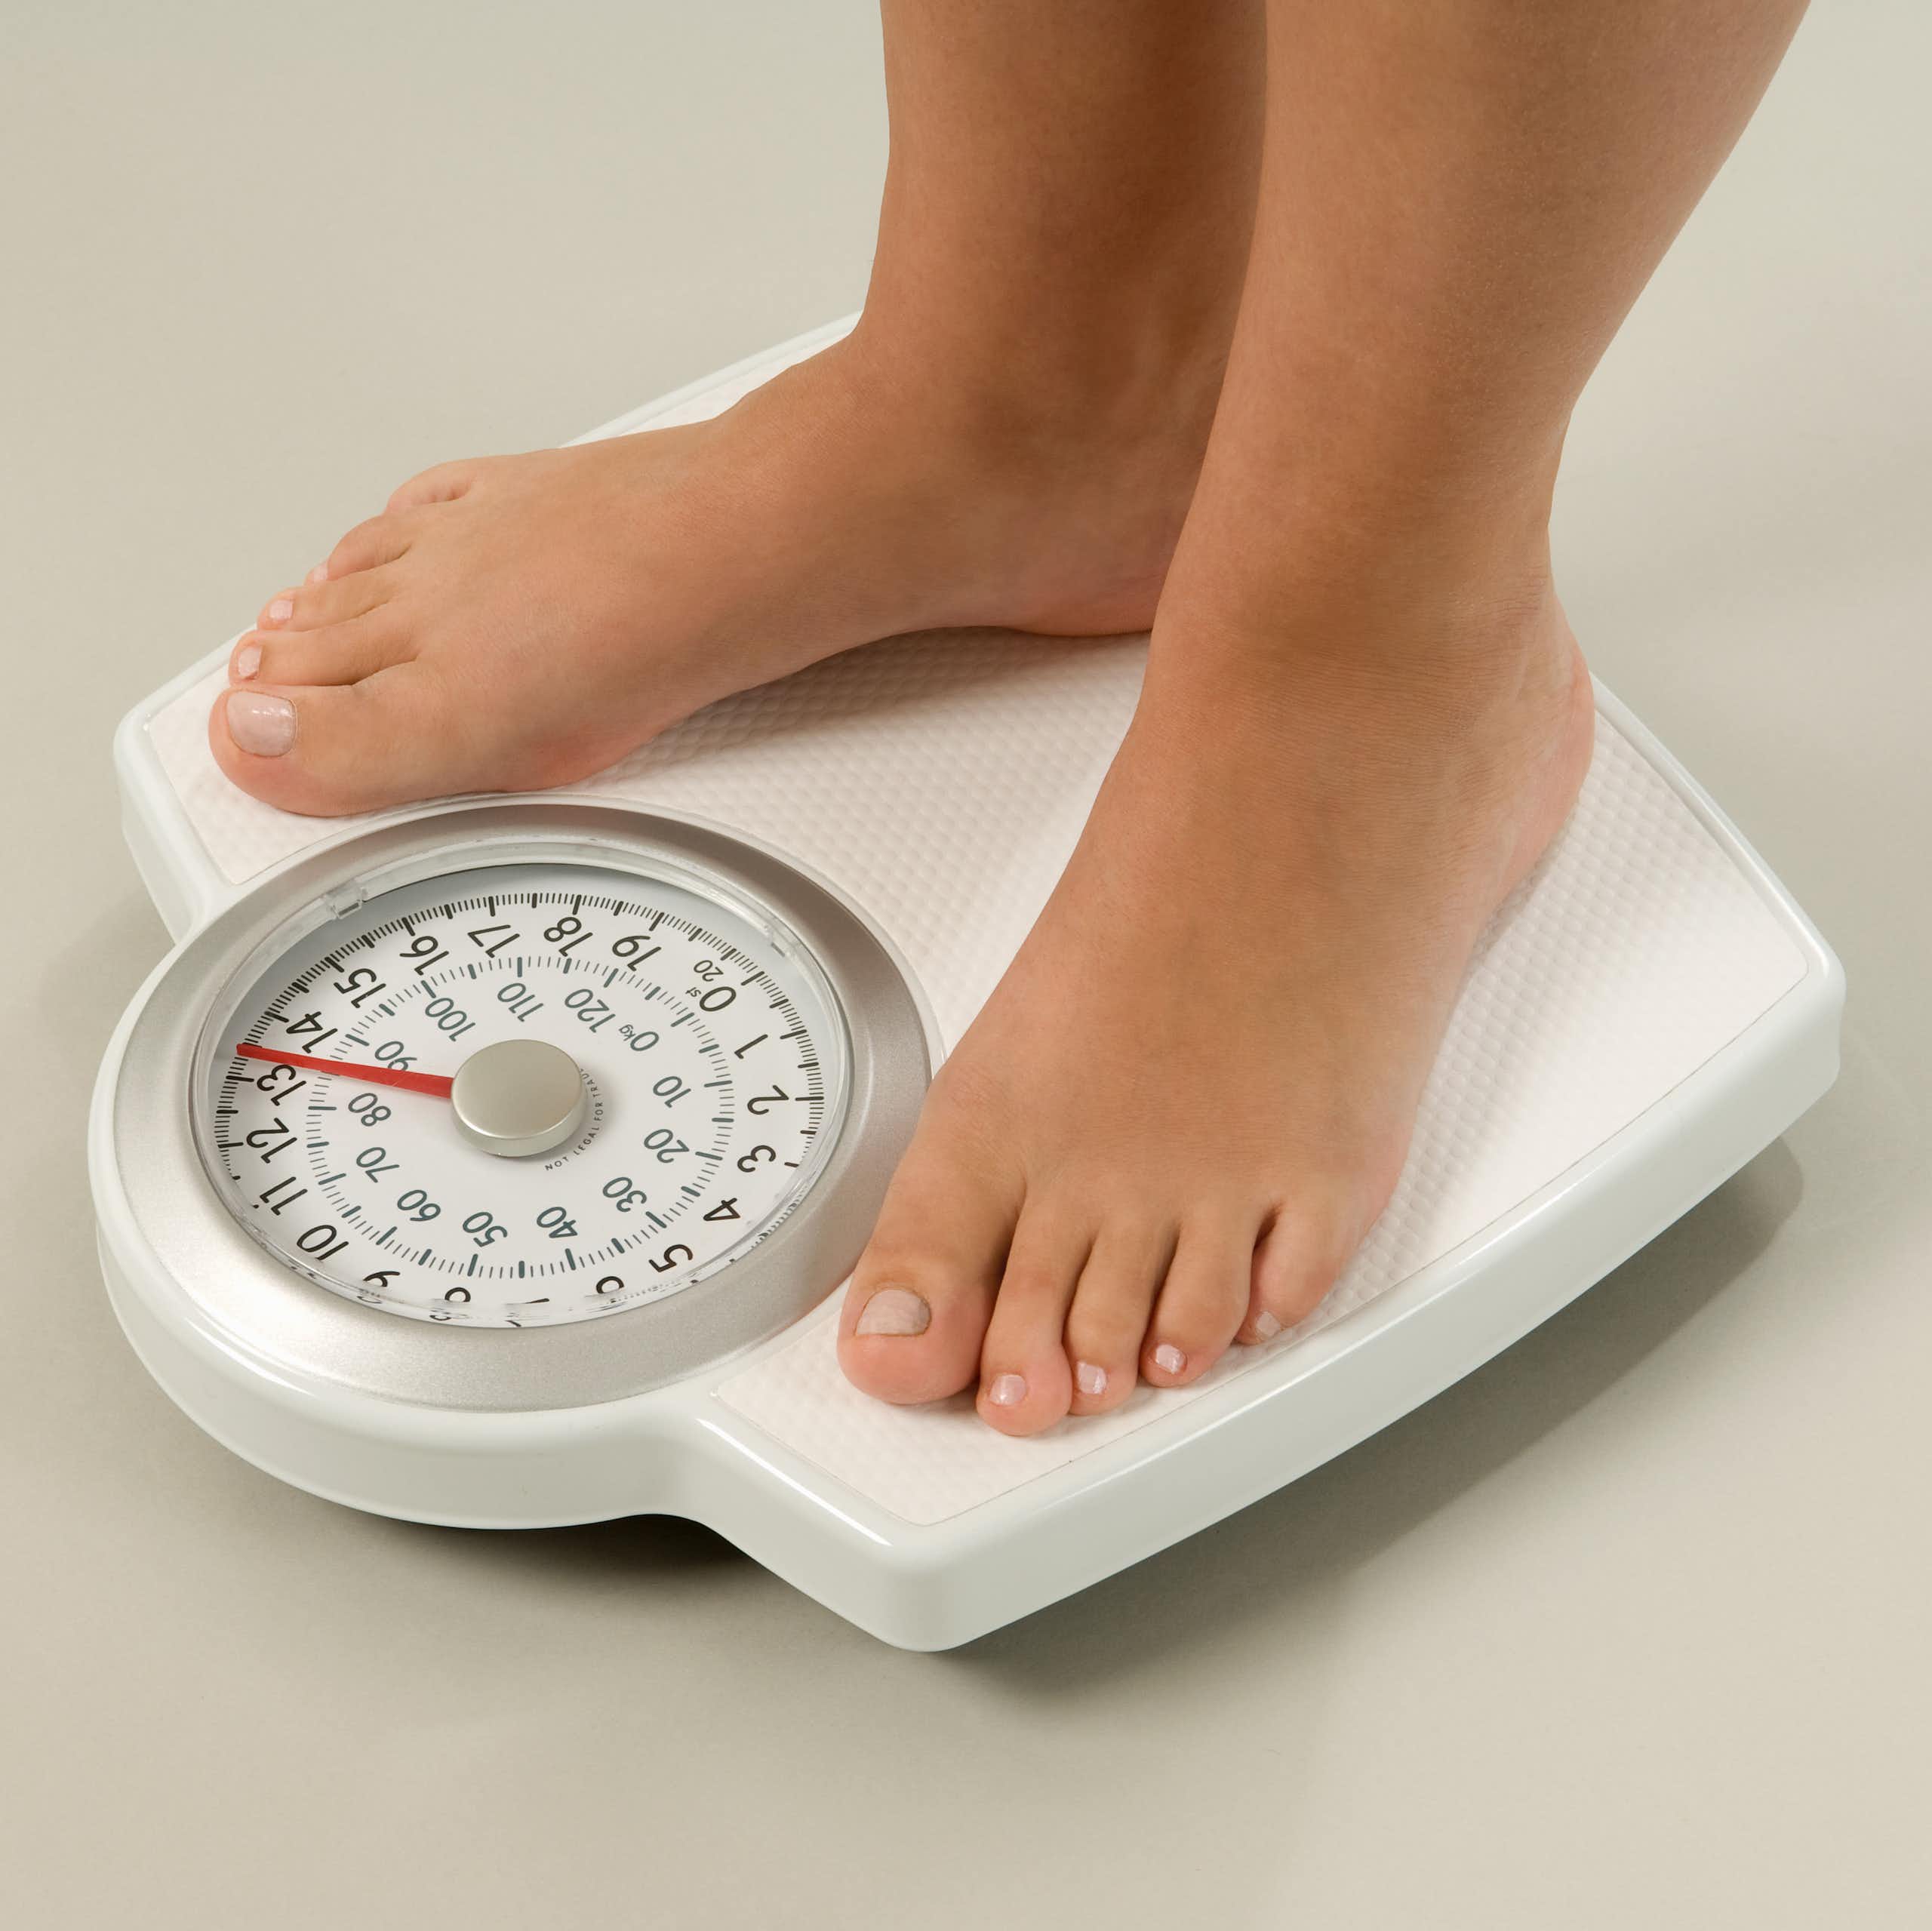 A person standing on bathroom scales